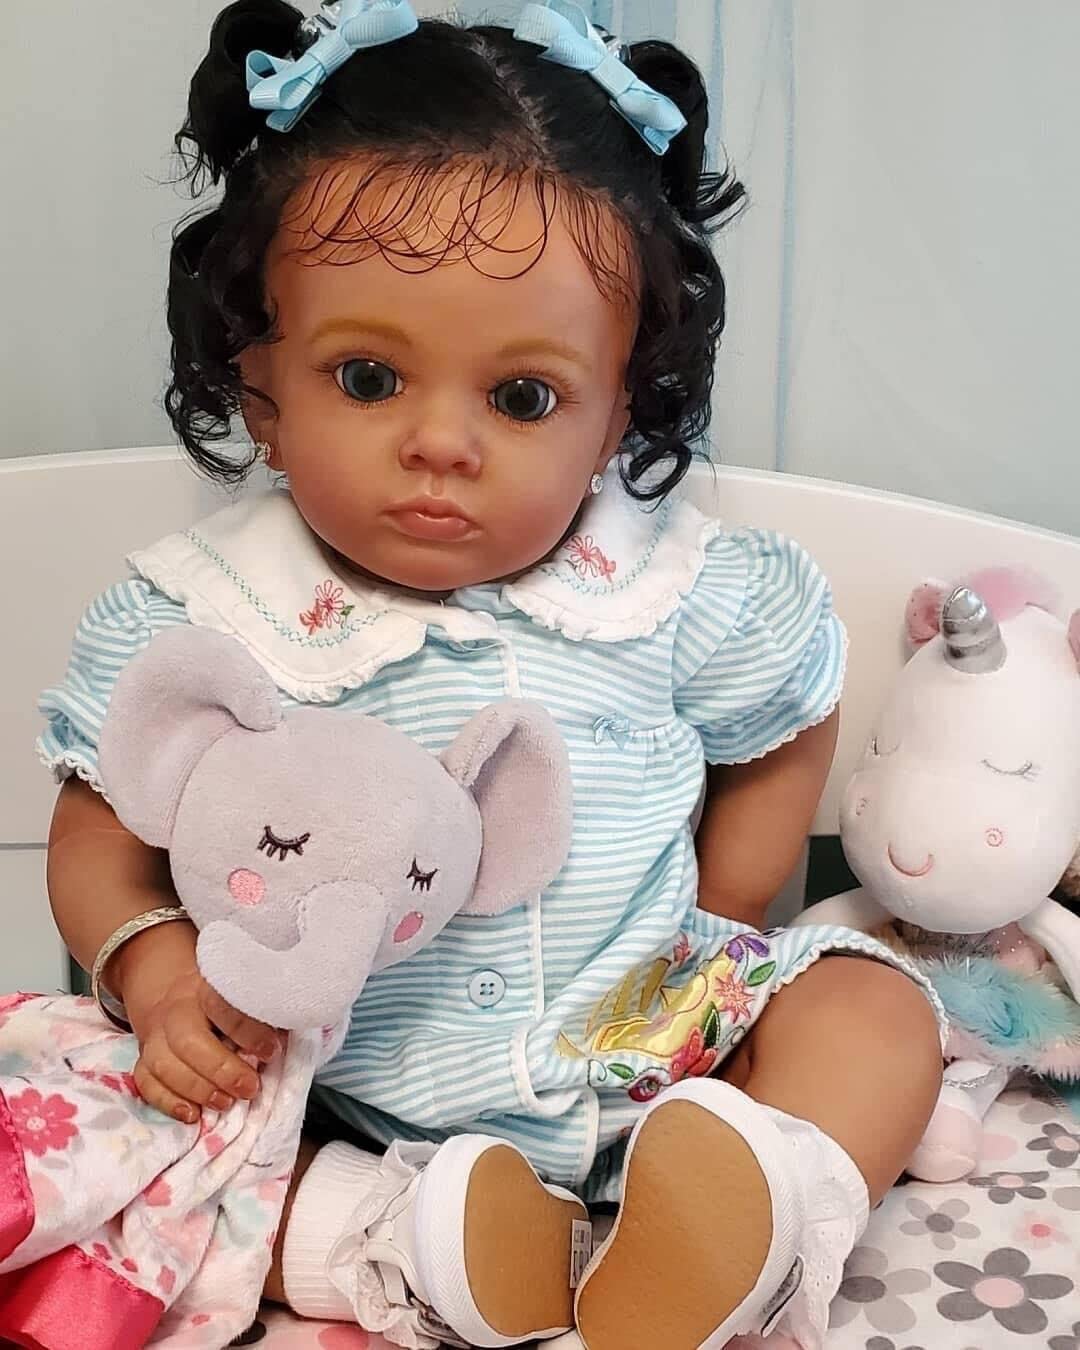 Angelbaby Lifelike Reborn Baby Dolls Black Girl 24 inch African American Reborn Toddler Dolls Look Real Cute Soft Realistic Newborn Silicone Dolls for Girls Gift Toys